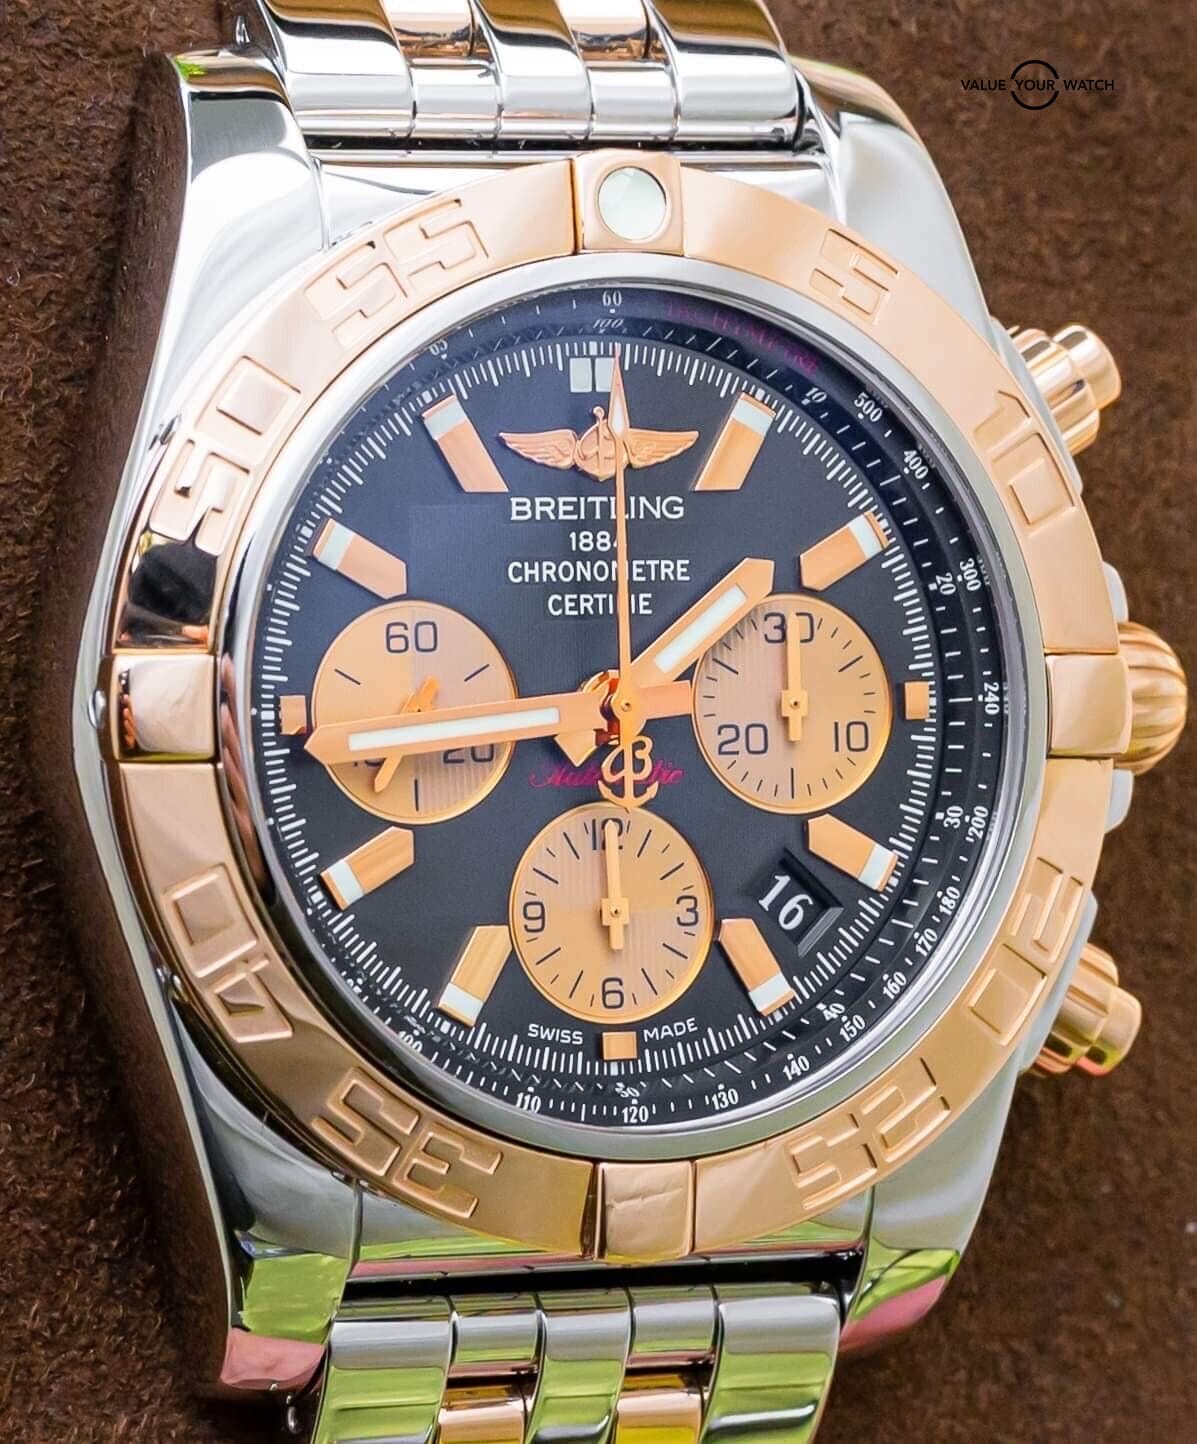 Breitling Chronomat 44 Rose Gold $13K MSRP Two-Tone Black Dial CB0110 | Value Your Watch